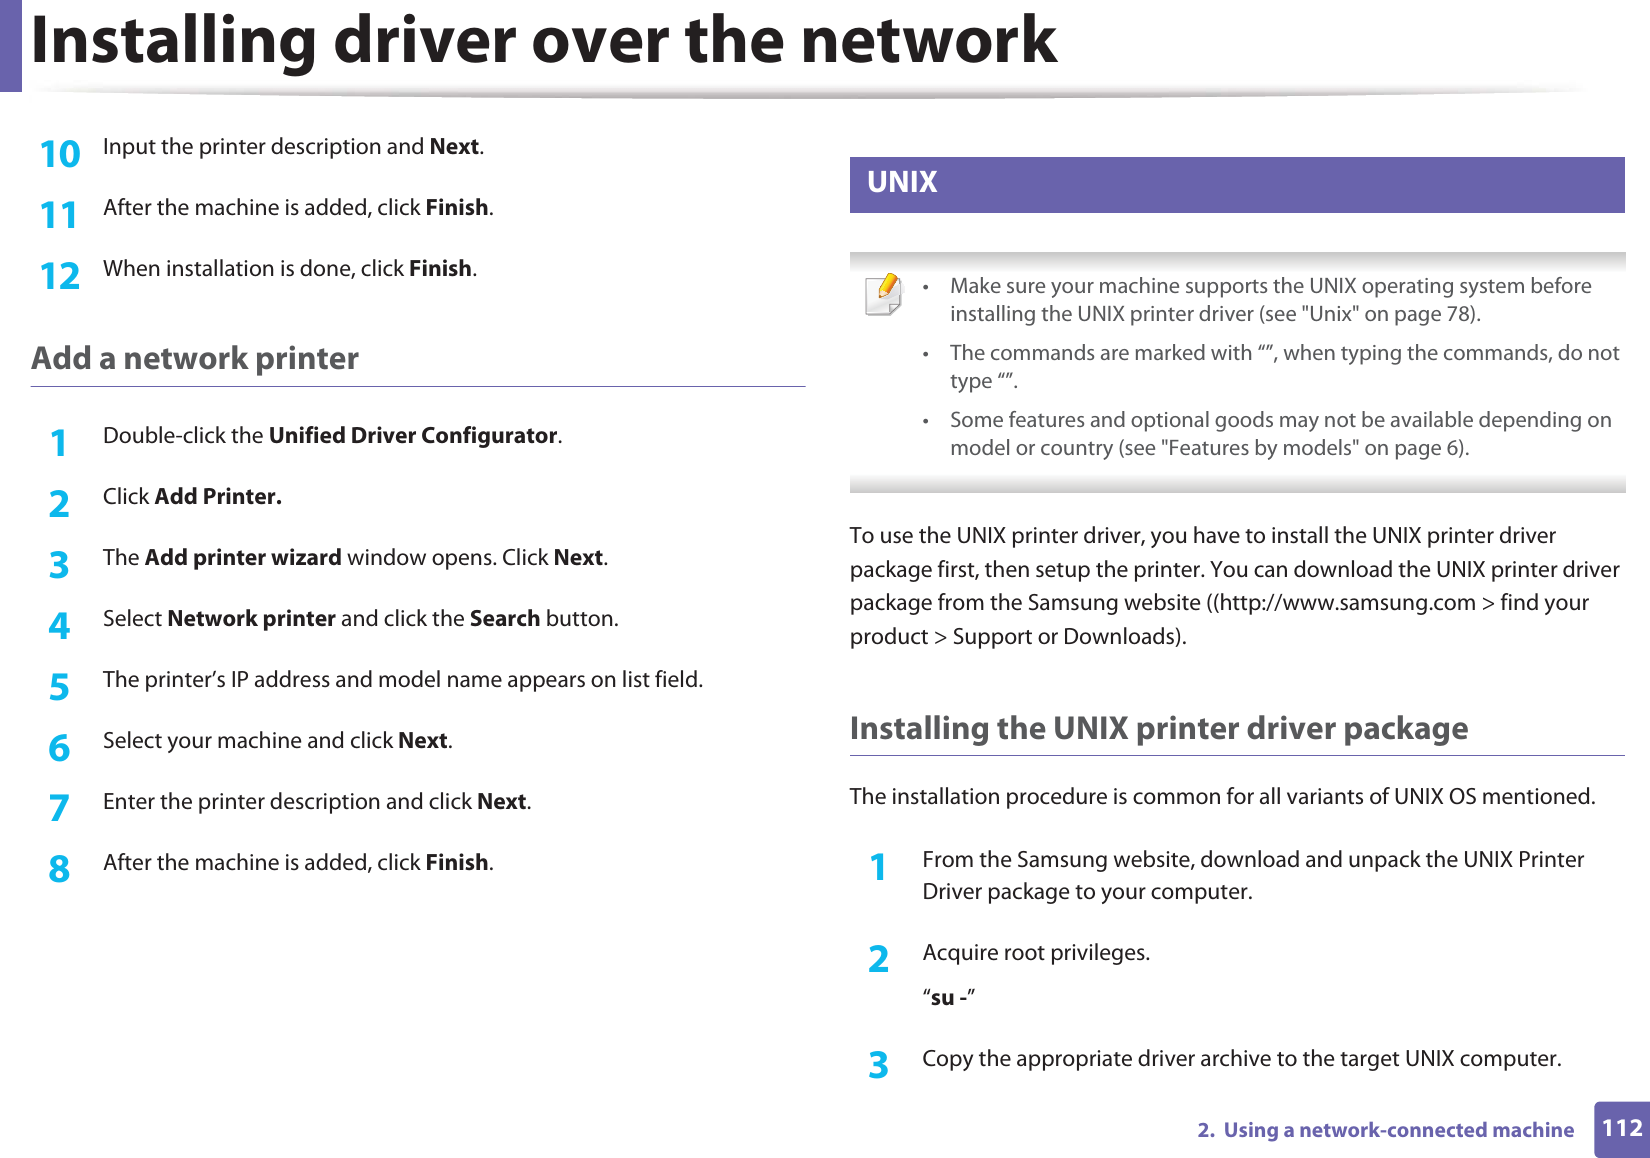 Installing driver over the network1122.  Using a network-connected machine10  Input the printer description and Next.11  After the machine is added, click Finish.12  When installation is done, click Finish.Add a network printer1Double-click the Unified Driver Configurator.2  Click Add Printer.3  The Add printer wizard window opens. Click Next.4  Select Network printer and click the Search button.5  The printer’s IP address and model name appears on list field.6  Select your machine and click Next.7  Enter the printer description and click Next.8  After the machine is added, click Finish.10 UNIX • Make sure your machine supports the UNIX operating system before installing the UNIX printer driver (see &quot;Unix&quot; on page 78).• The commands are marked with “”, when typing the commands, do not type “”.• Some features and optional goods may not be available depending on model or country (see &quot;Features by models&quot; on page 6). To use the UNIX printer driver, you have to install the UNIX printer driver package first, then setup the printer. You can download the UNIX printer driver package from the Samsung website ((http://www.samsung.com &gt; find your product &gt; Support or Downloads).Installing the UNIX printer driver packageThe installation procedure is common for all variants of UNIX OS mentioned.1From the Samsung website, download and unpack the UNIX Printer Driver package to your computer. 2  Acquire root privileges.“su -”3  Copy the appropriate driver archive to the target UNIX computer.